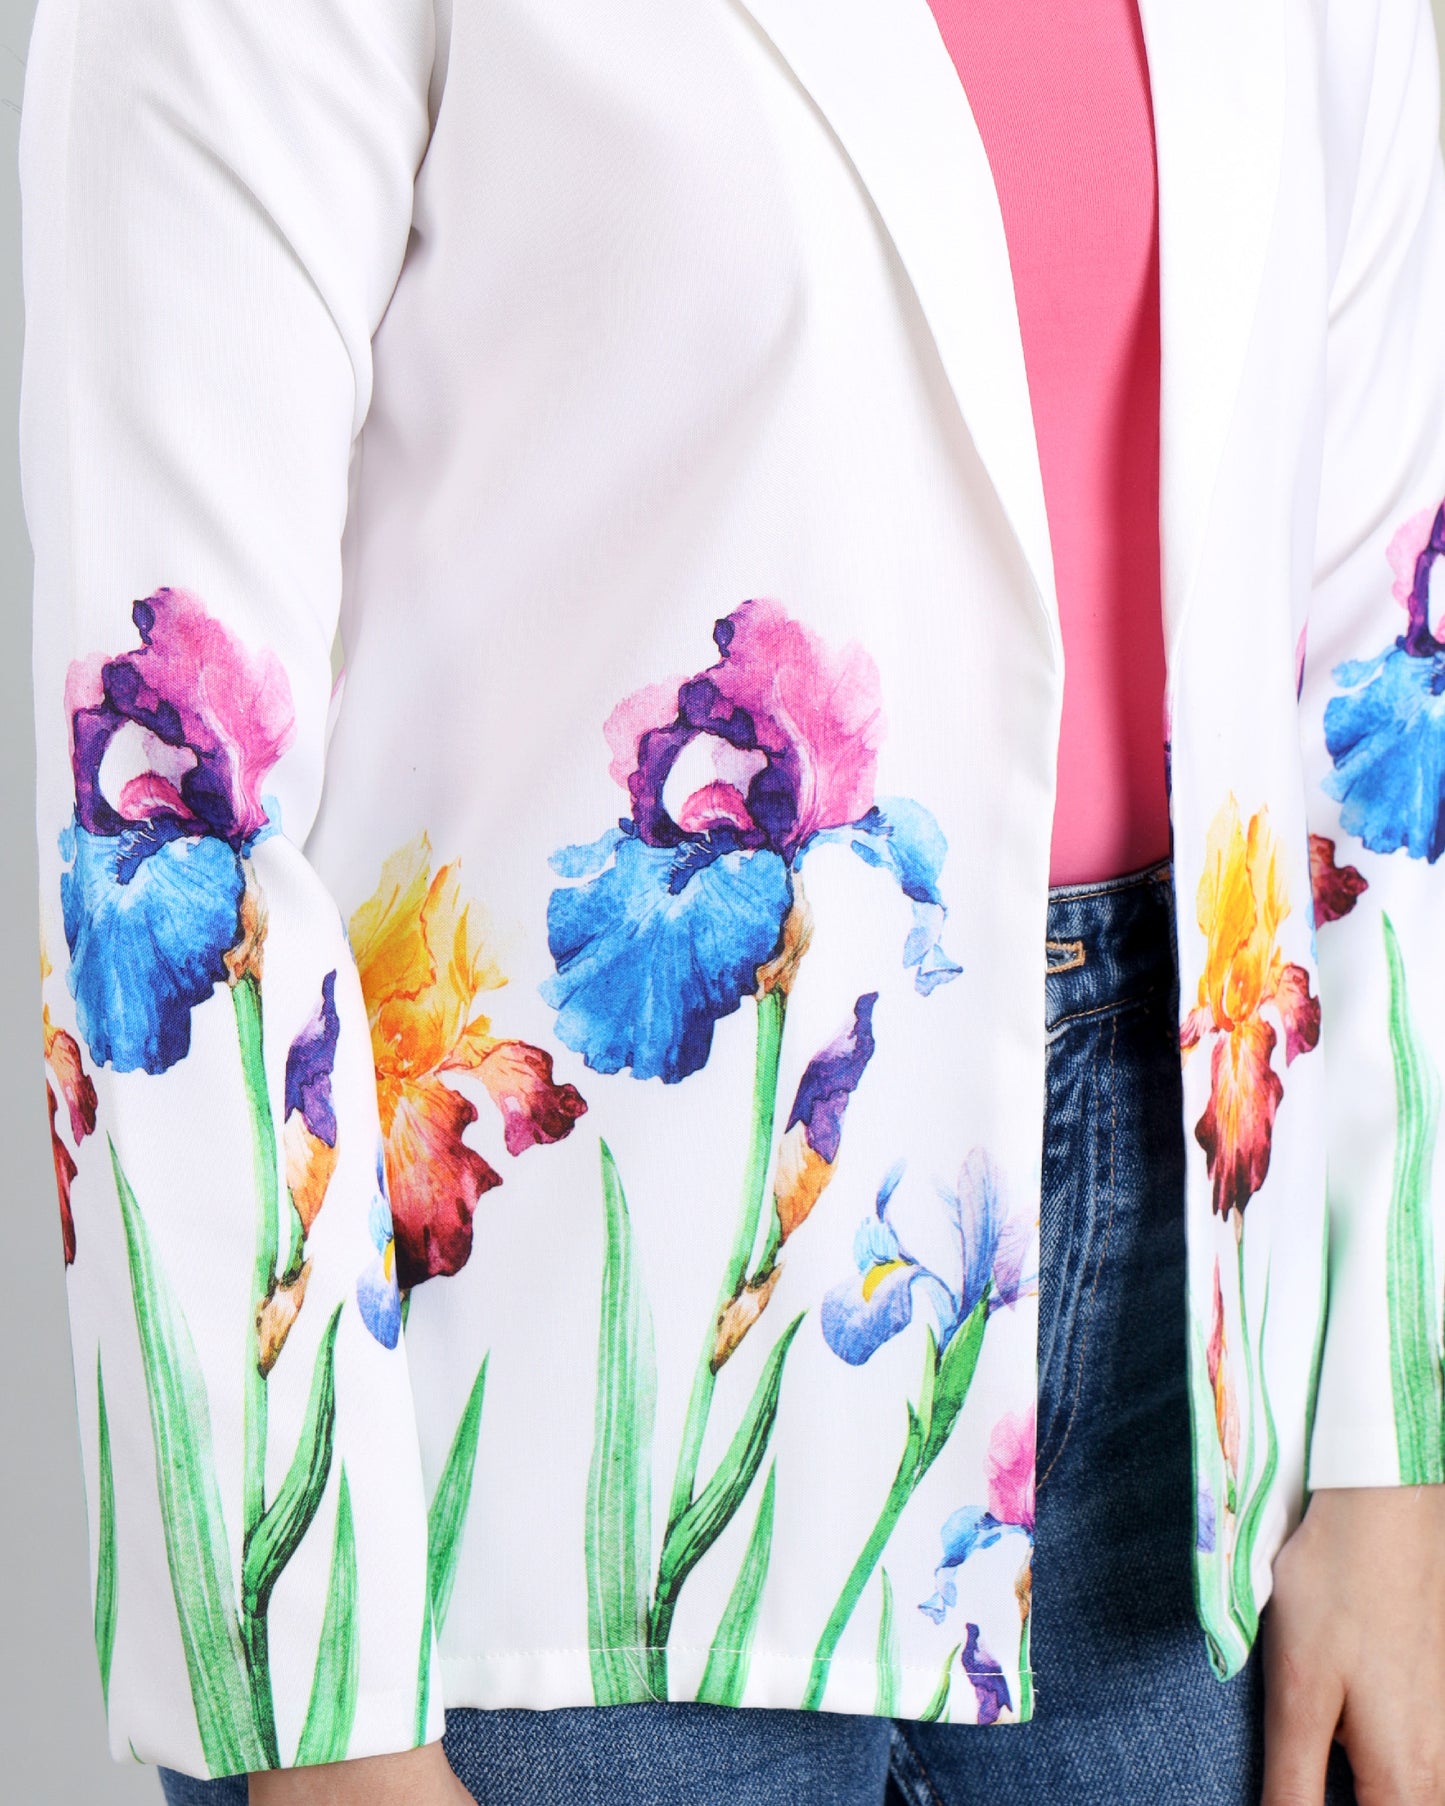 Layer Up in Bloom:  Your New Go-To Women's Jacket